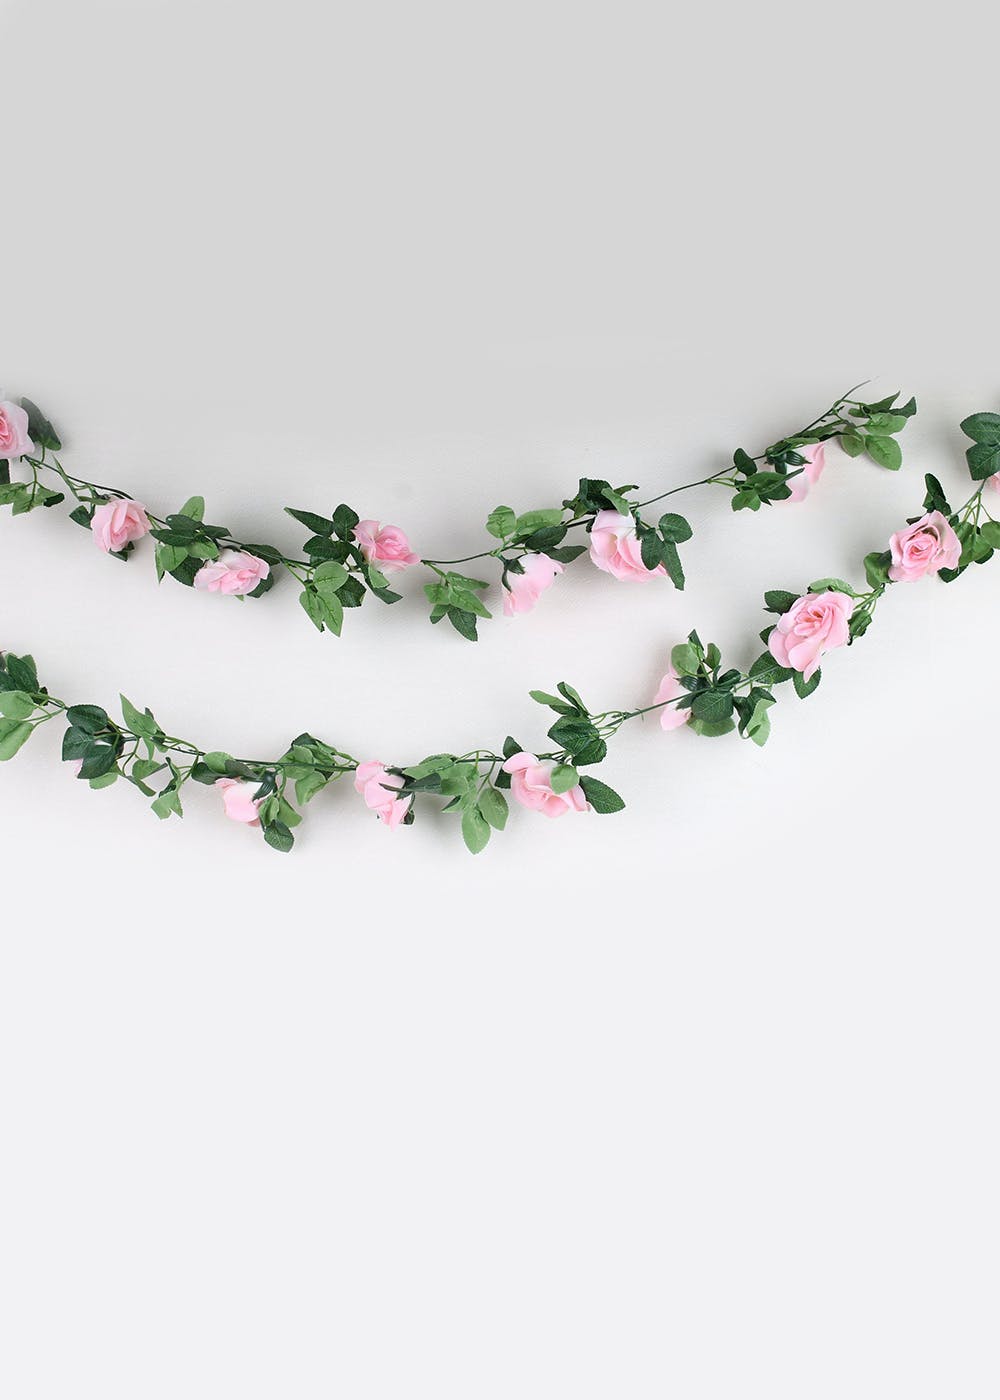 Artificial Decorative Rose Vine for Wall Décor - Pink